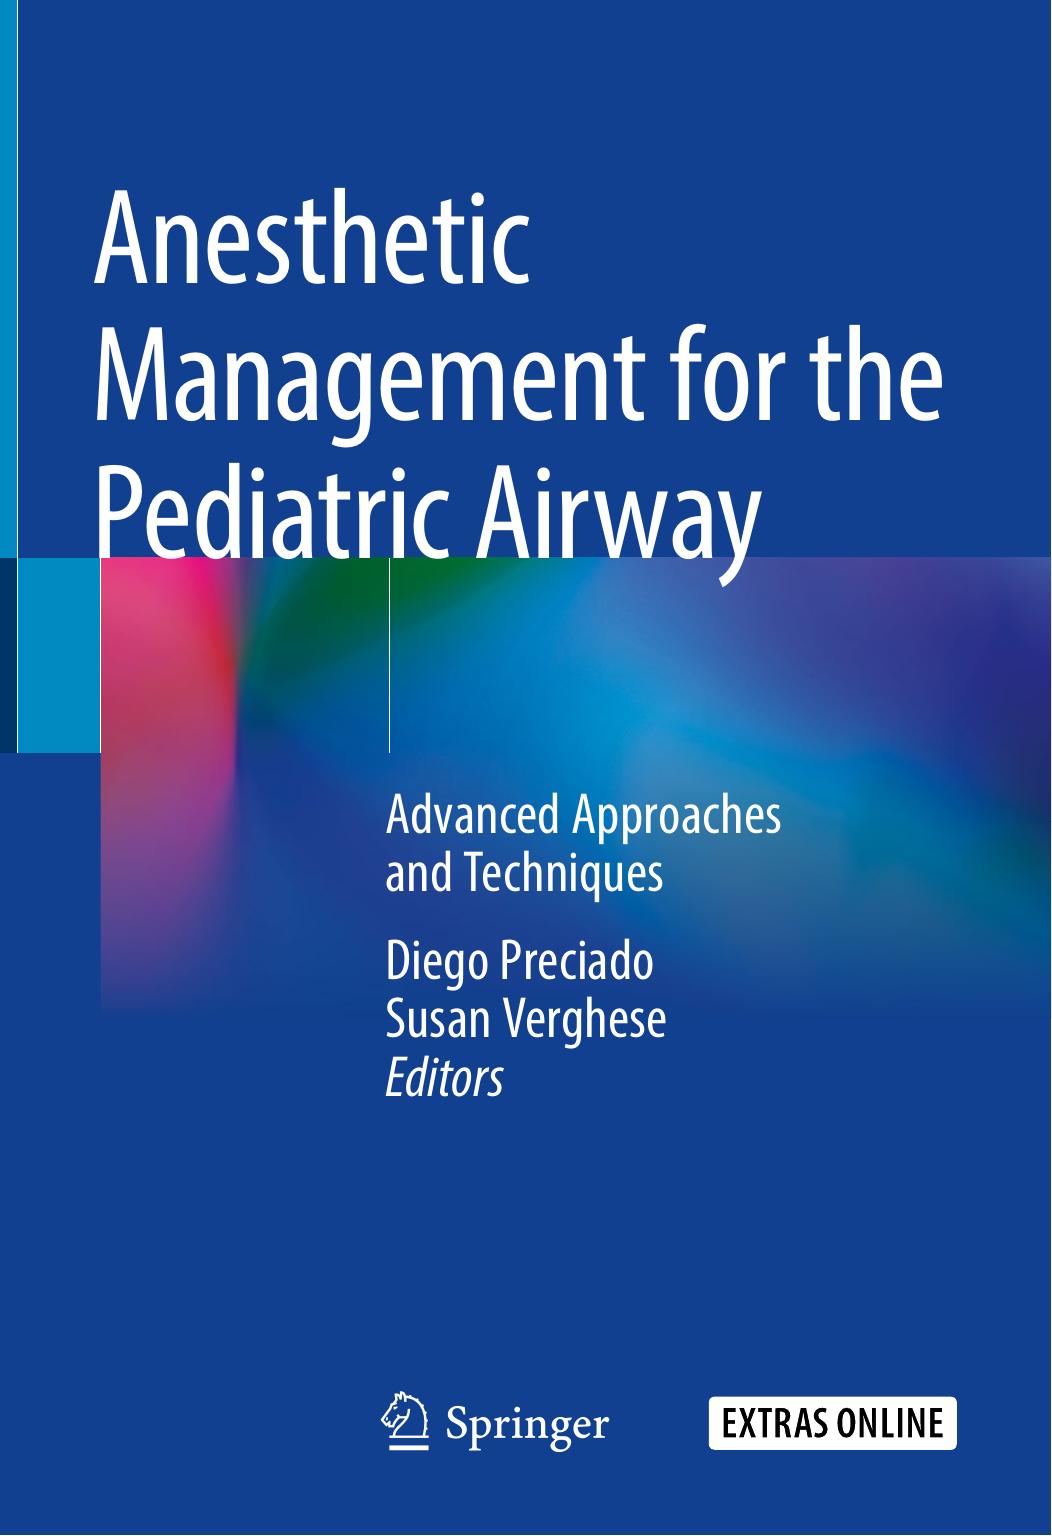 Anesthetic Management for the Pediatric Airway  Advanced Approaches and Techniques 2019